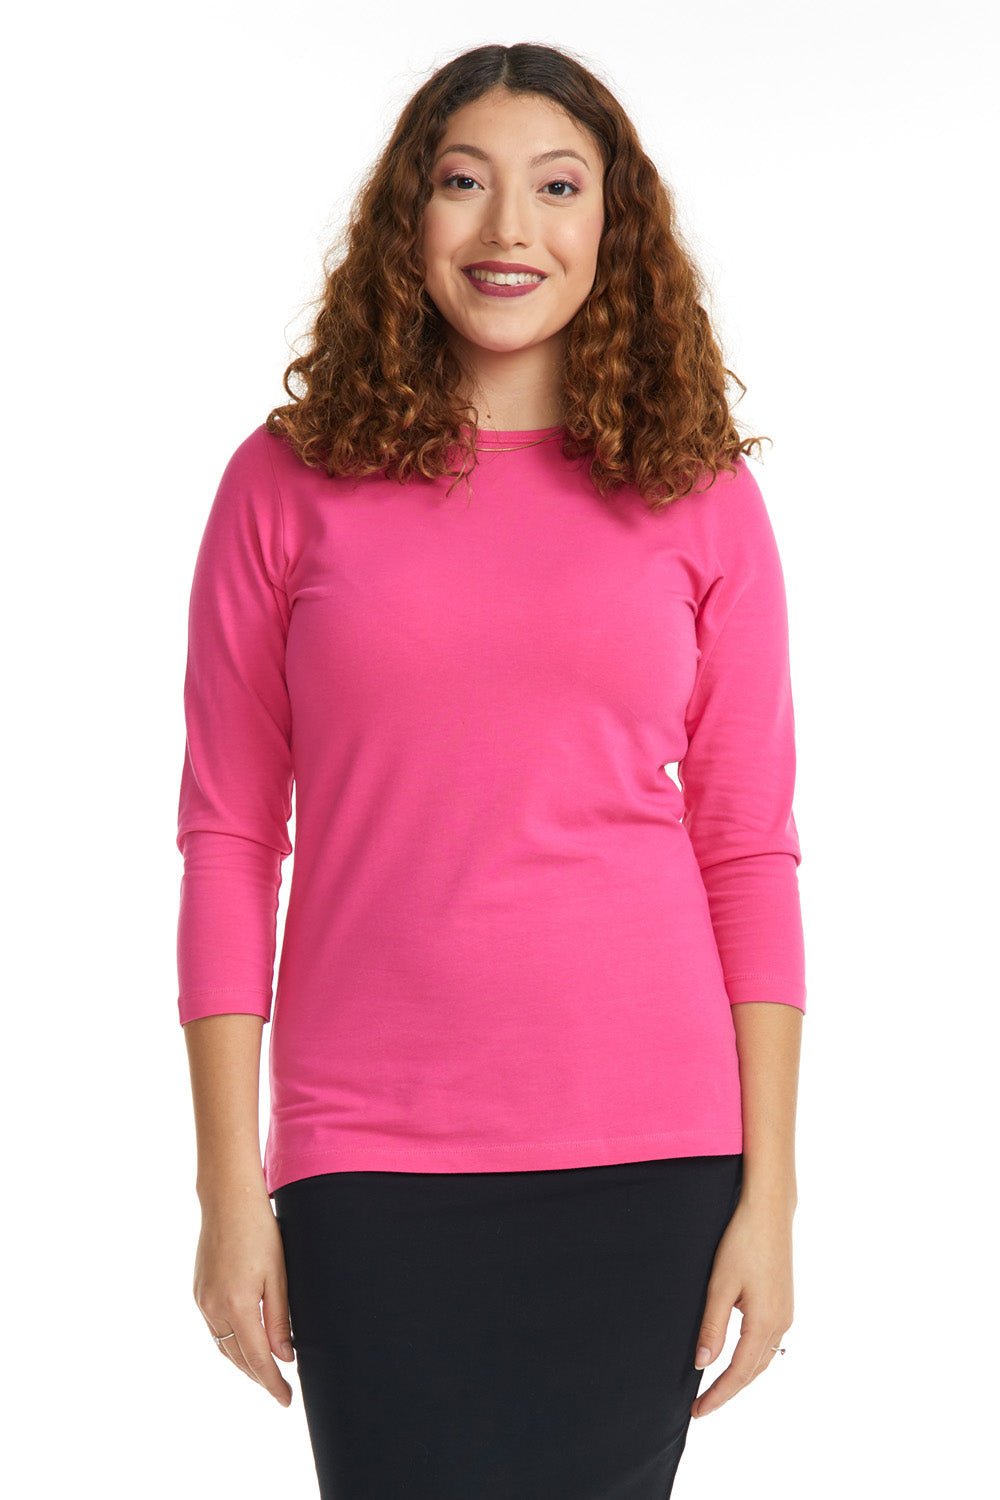 vibrant pink stretchy loose fitting cotton layering shirt 